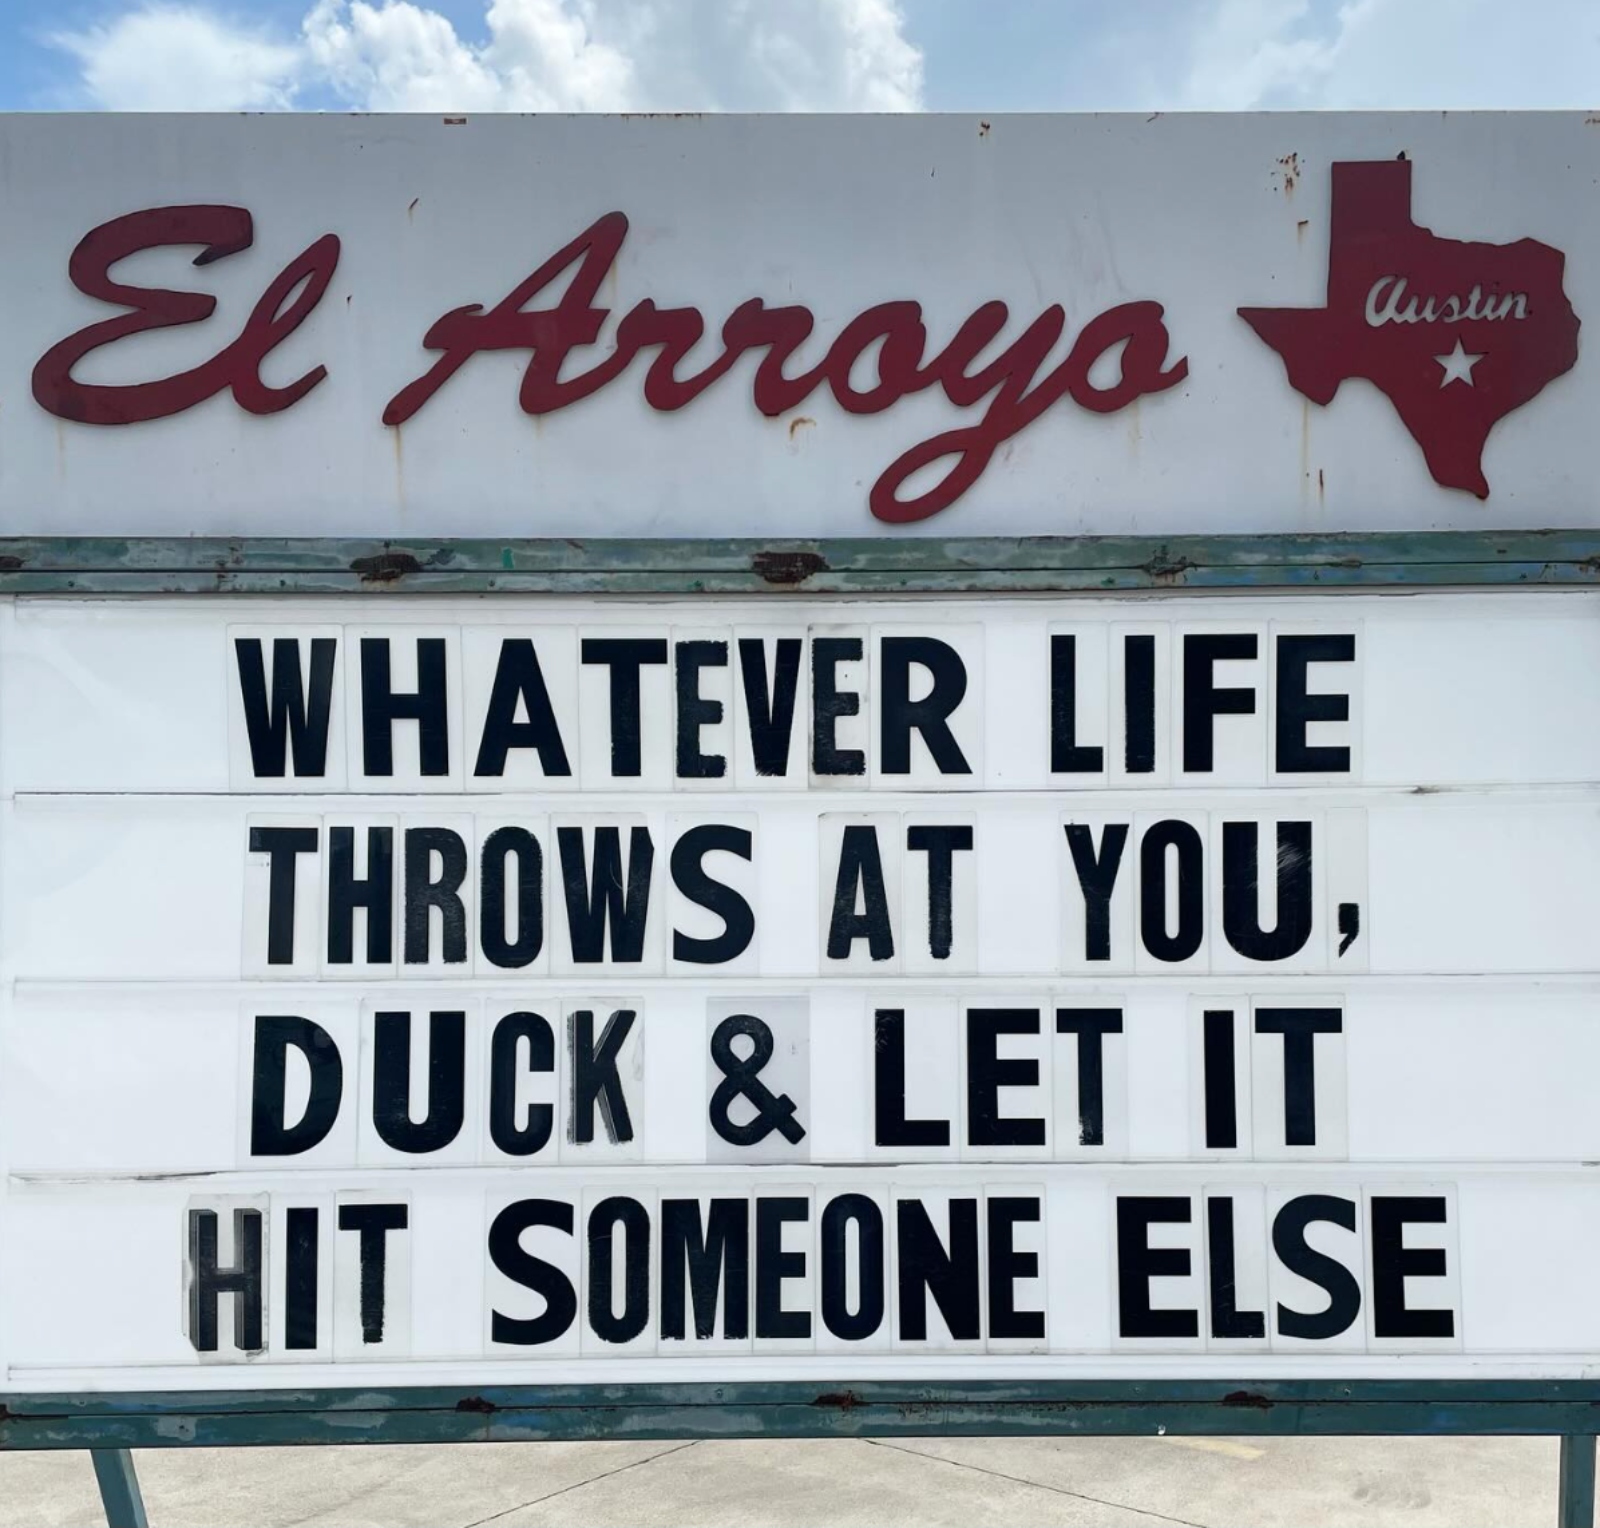 funny El Arroyo sign meme about what life throws at you